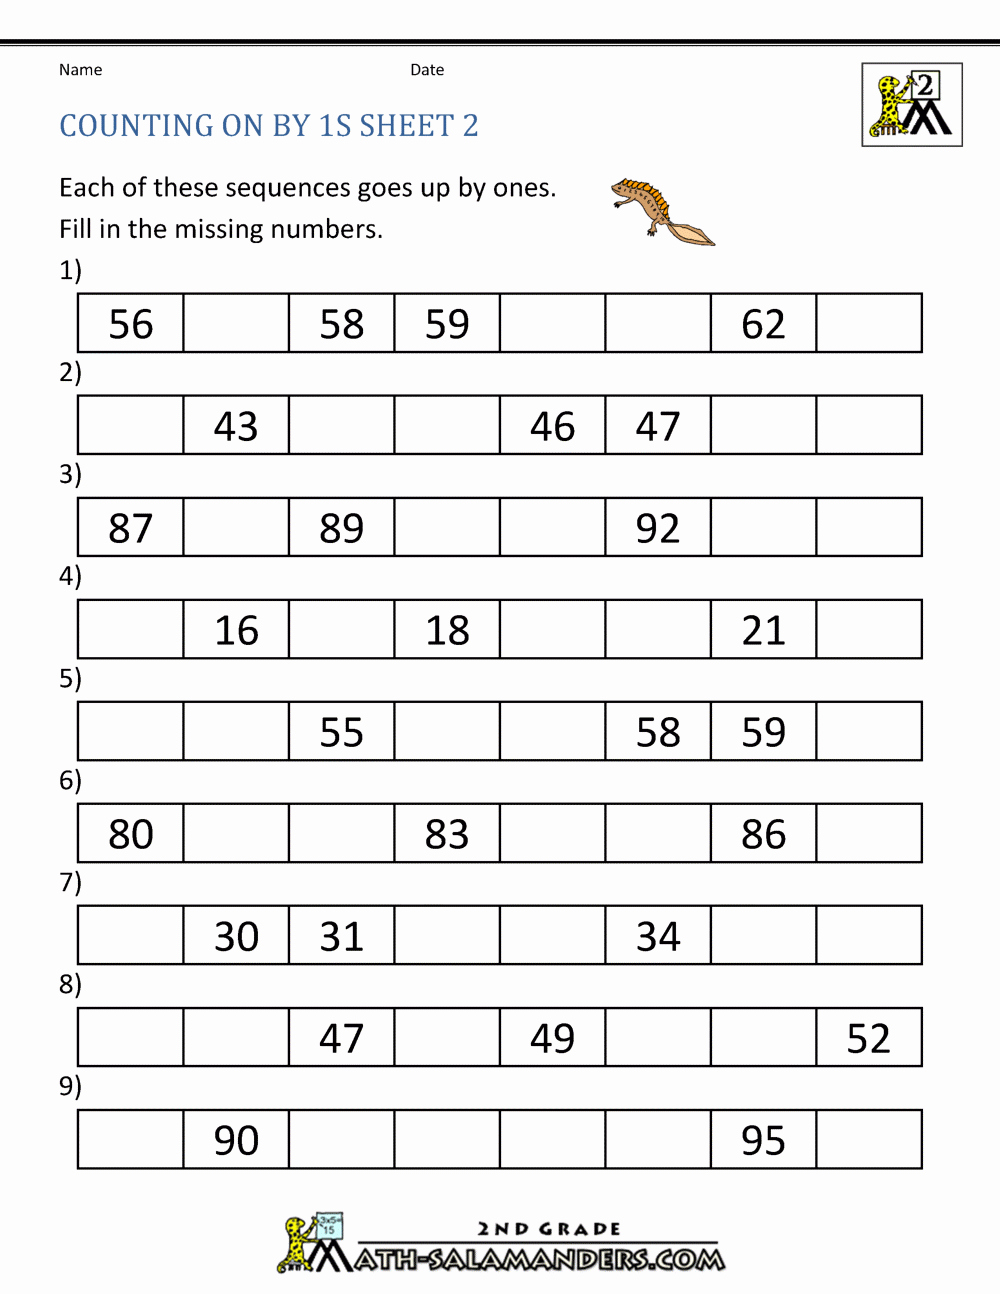 Practice 30 Effectively 2nd Grade Sequencing Worksheets Simple Template Design